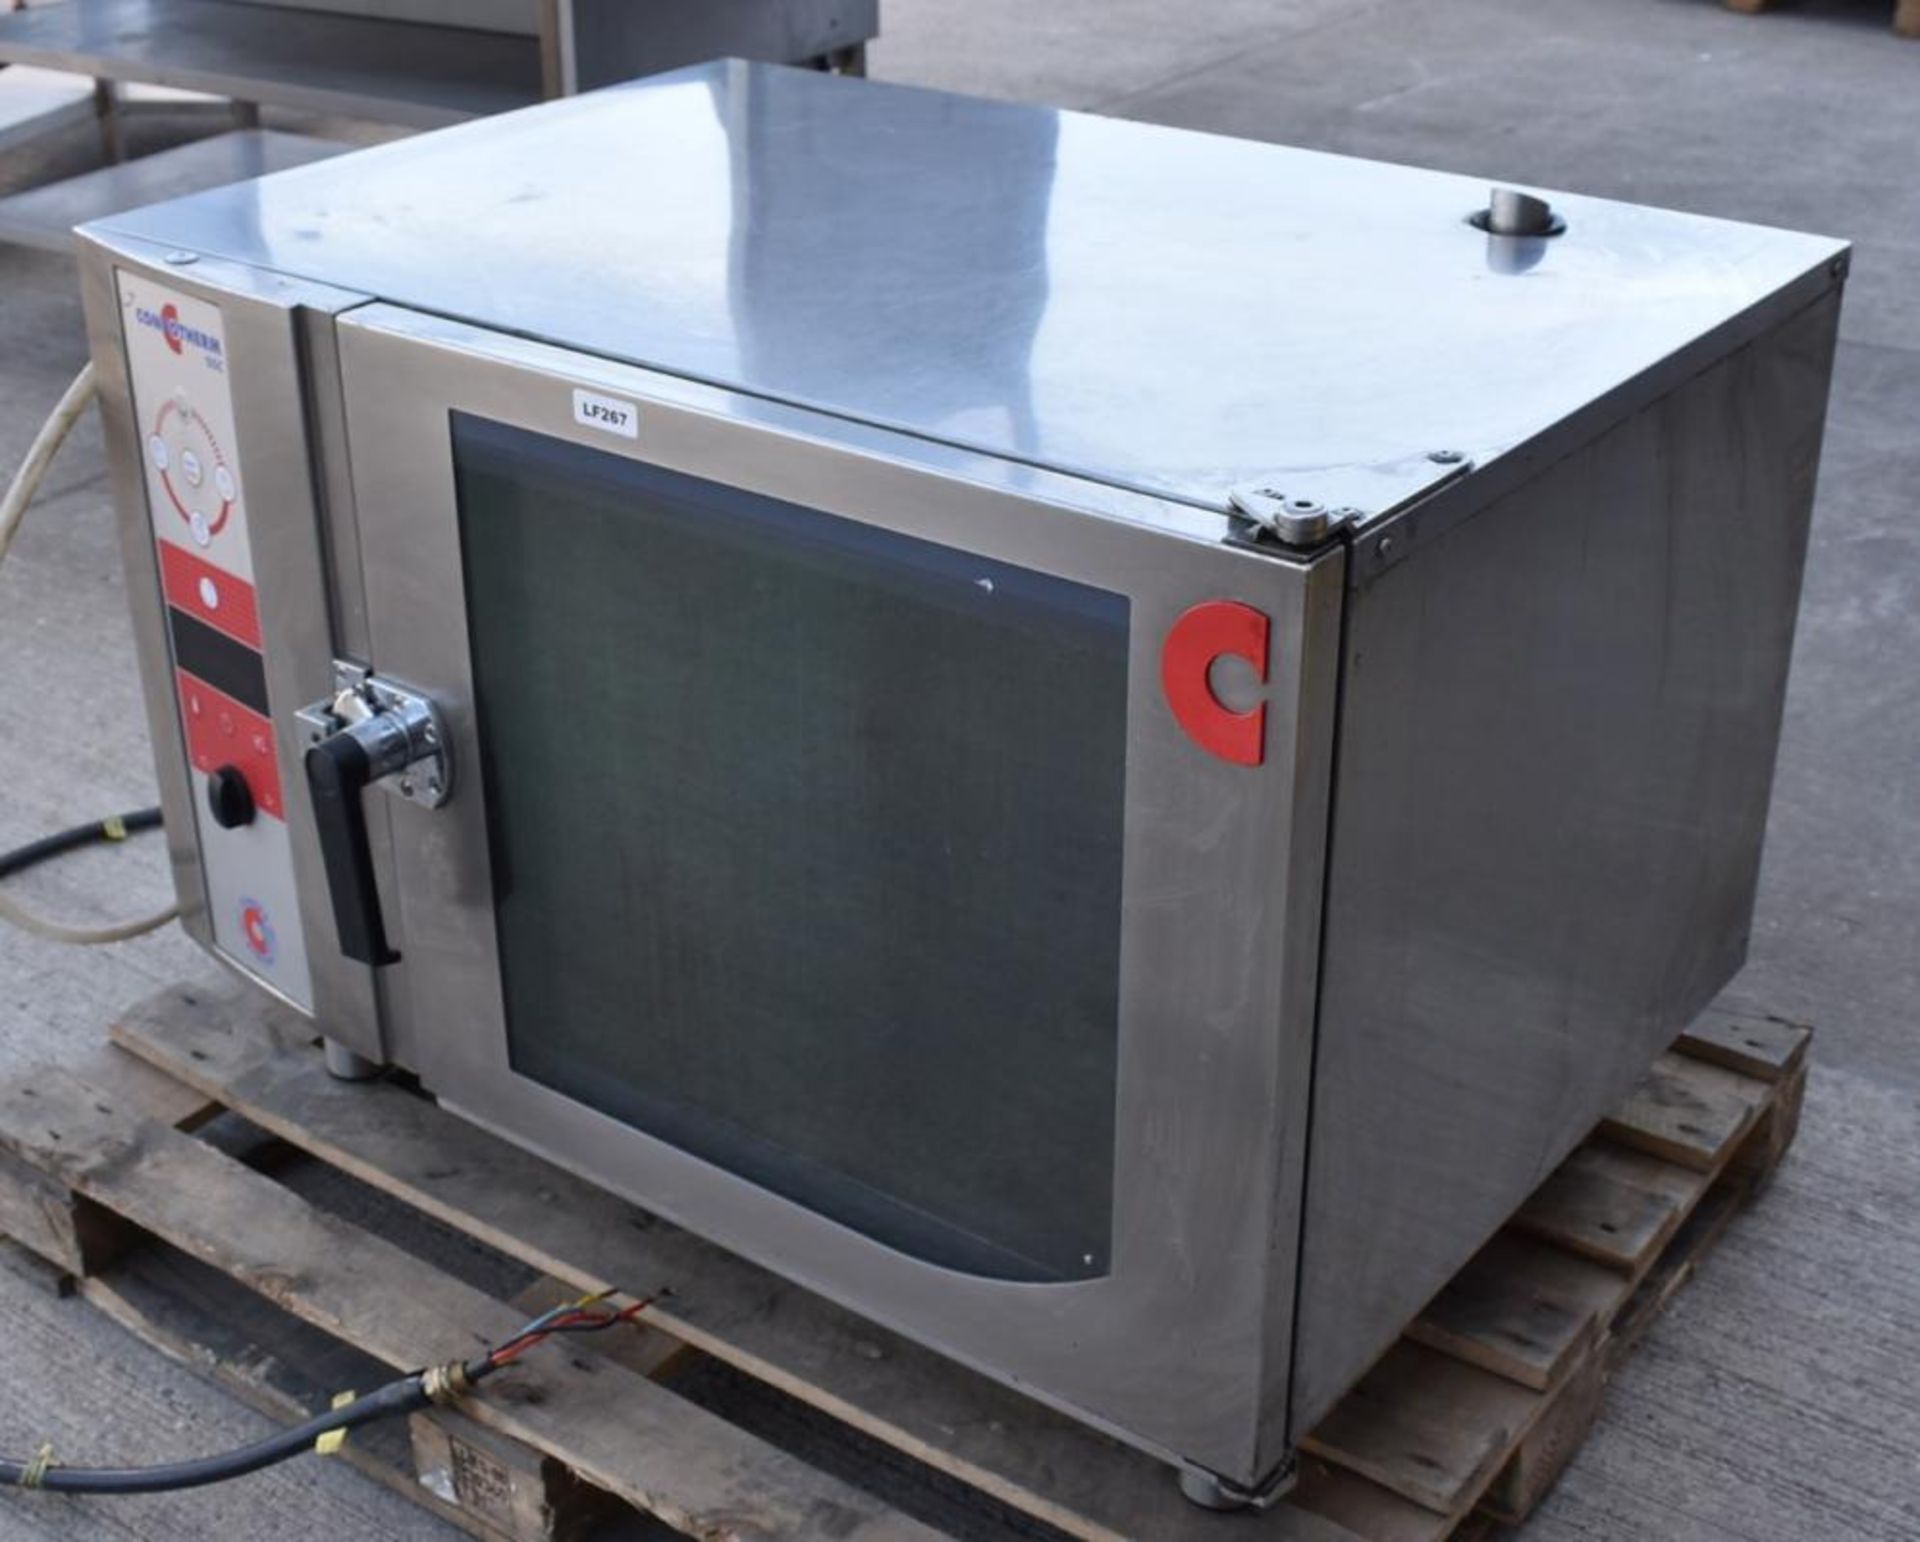 1 x Convotherm OSC Combi Oven - Model OSC 6.10 - 6 Grid Oven With Stainless Steel Finish - 3 Phase P - Image 13 of 14